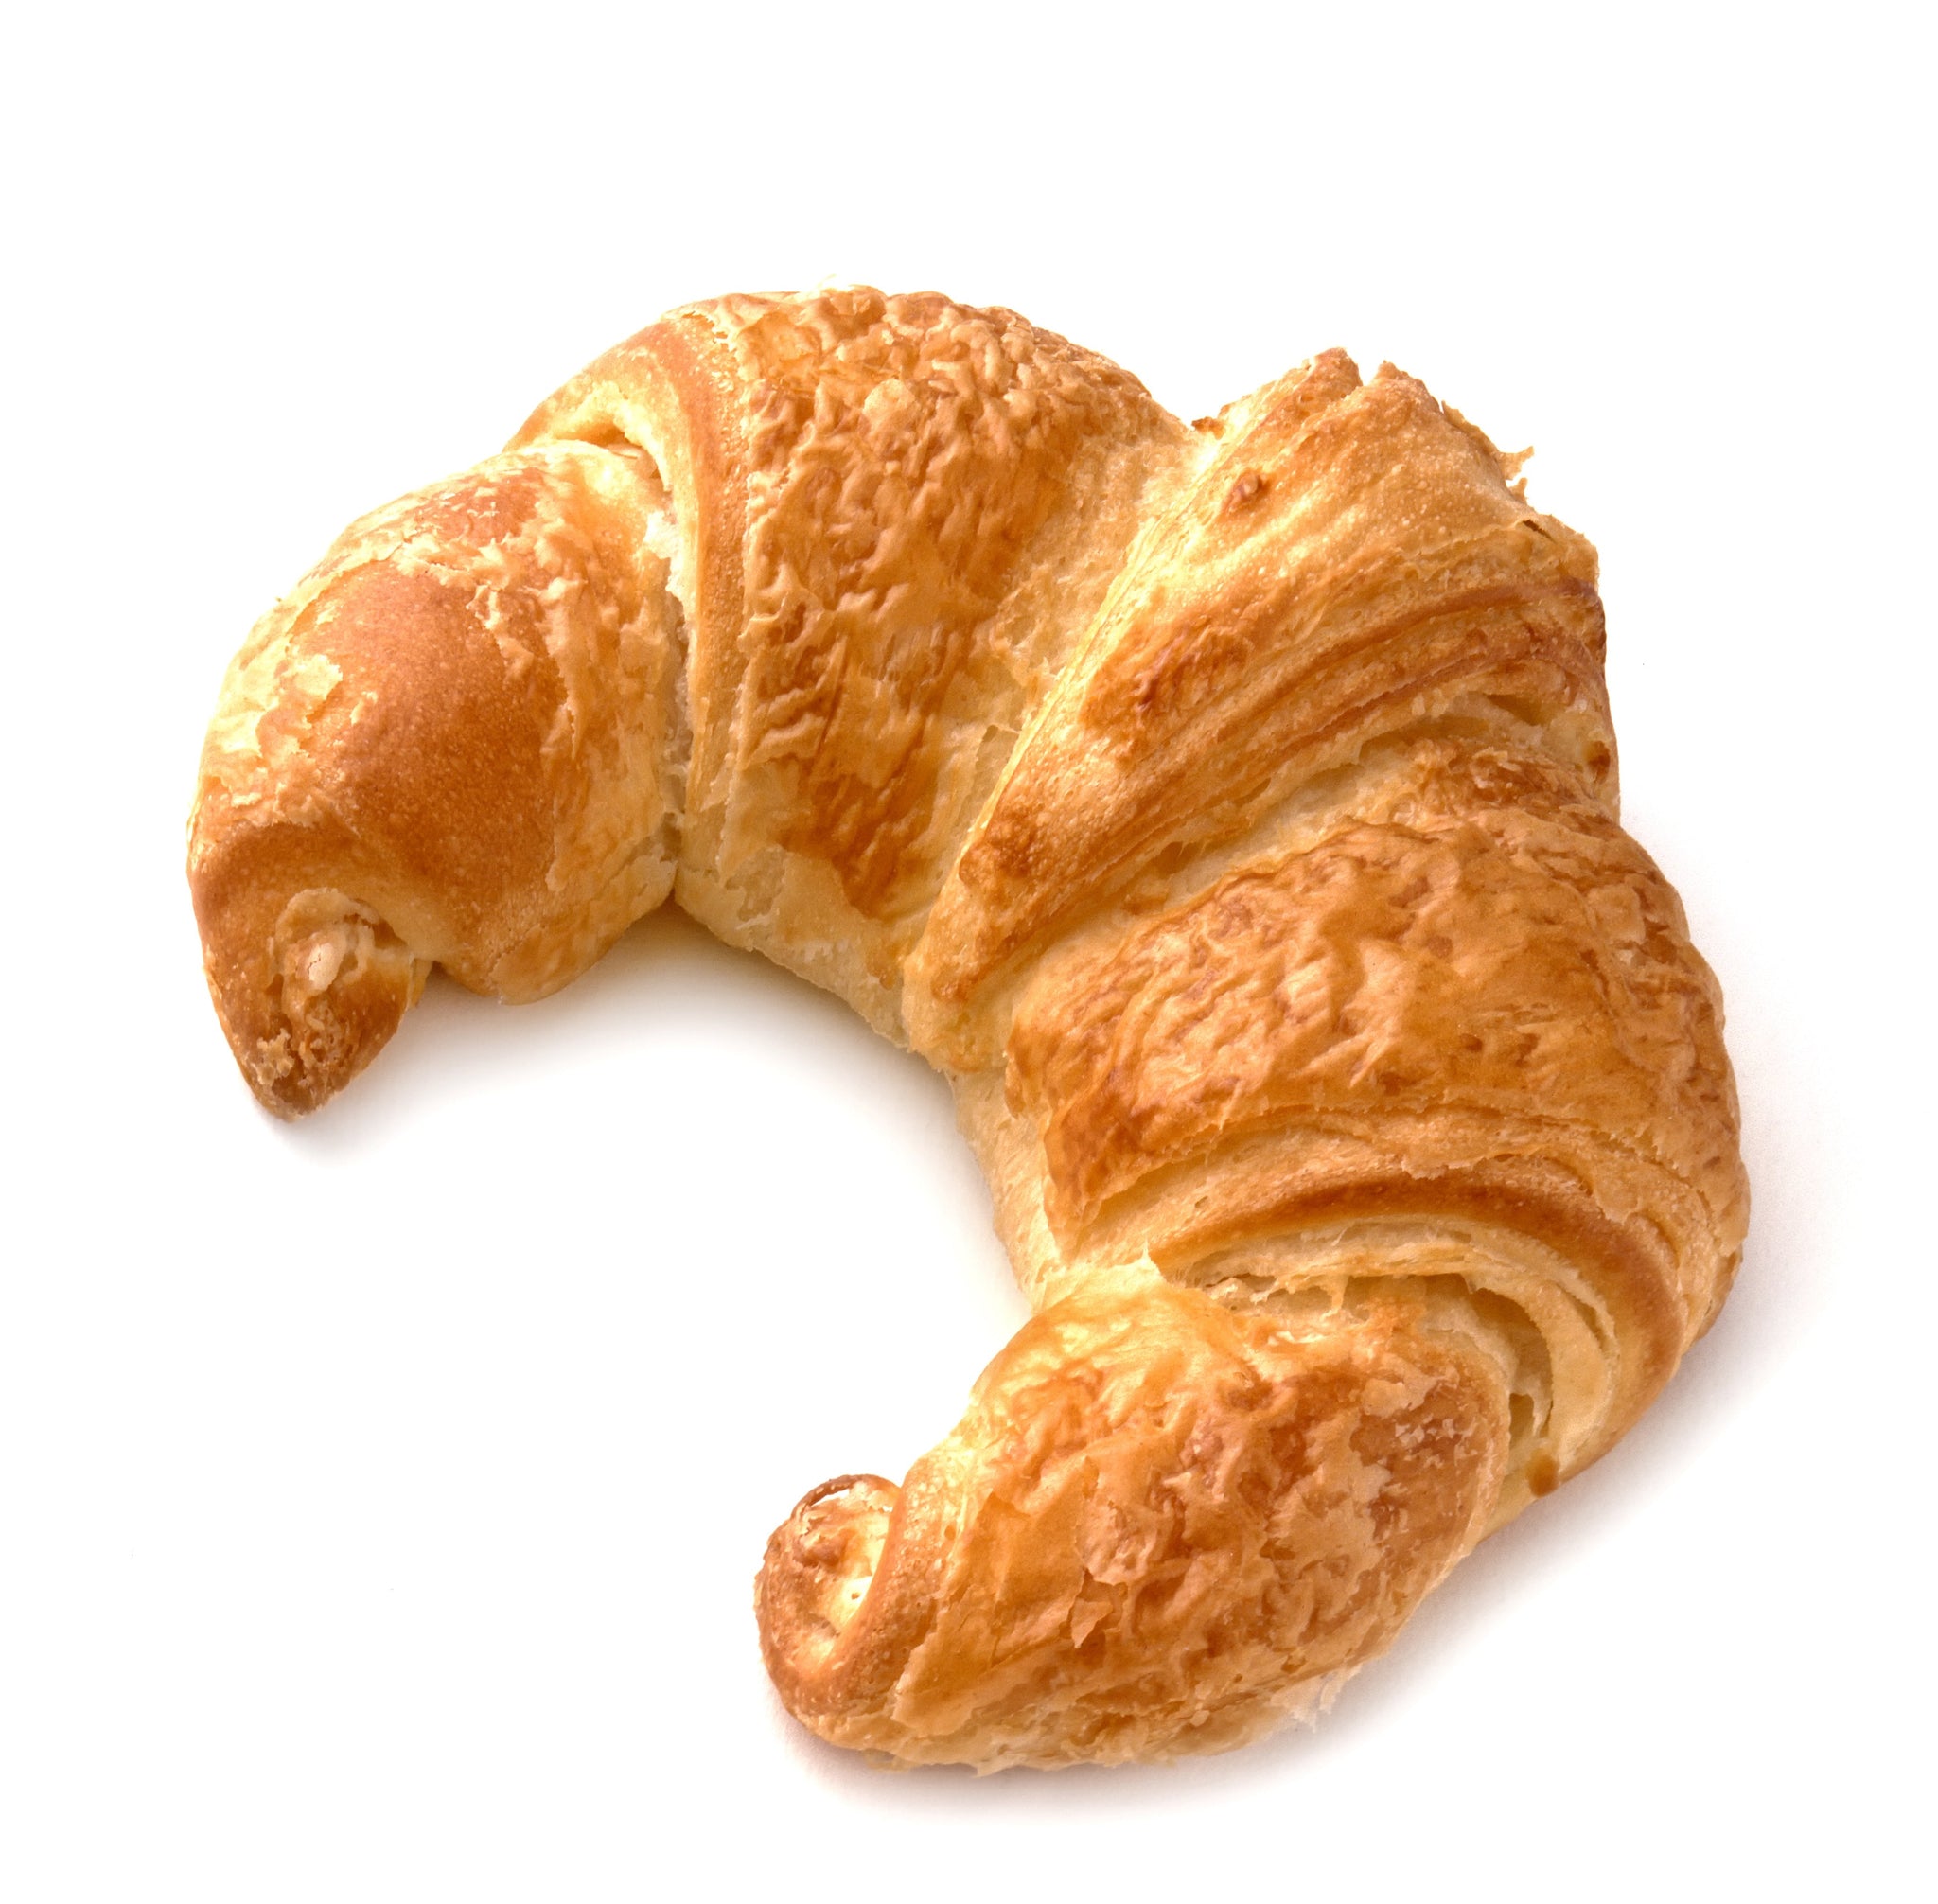 gre>Mini croissants -12 in packet, 32g